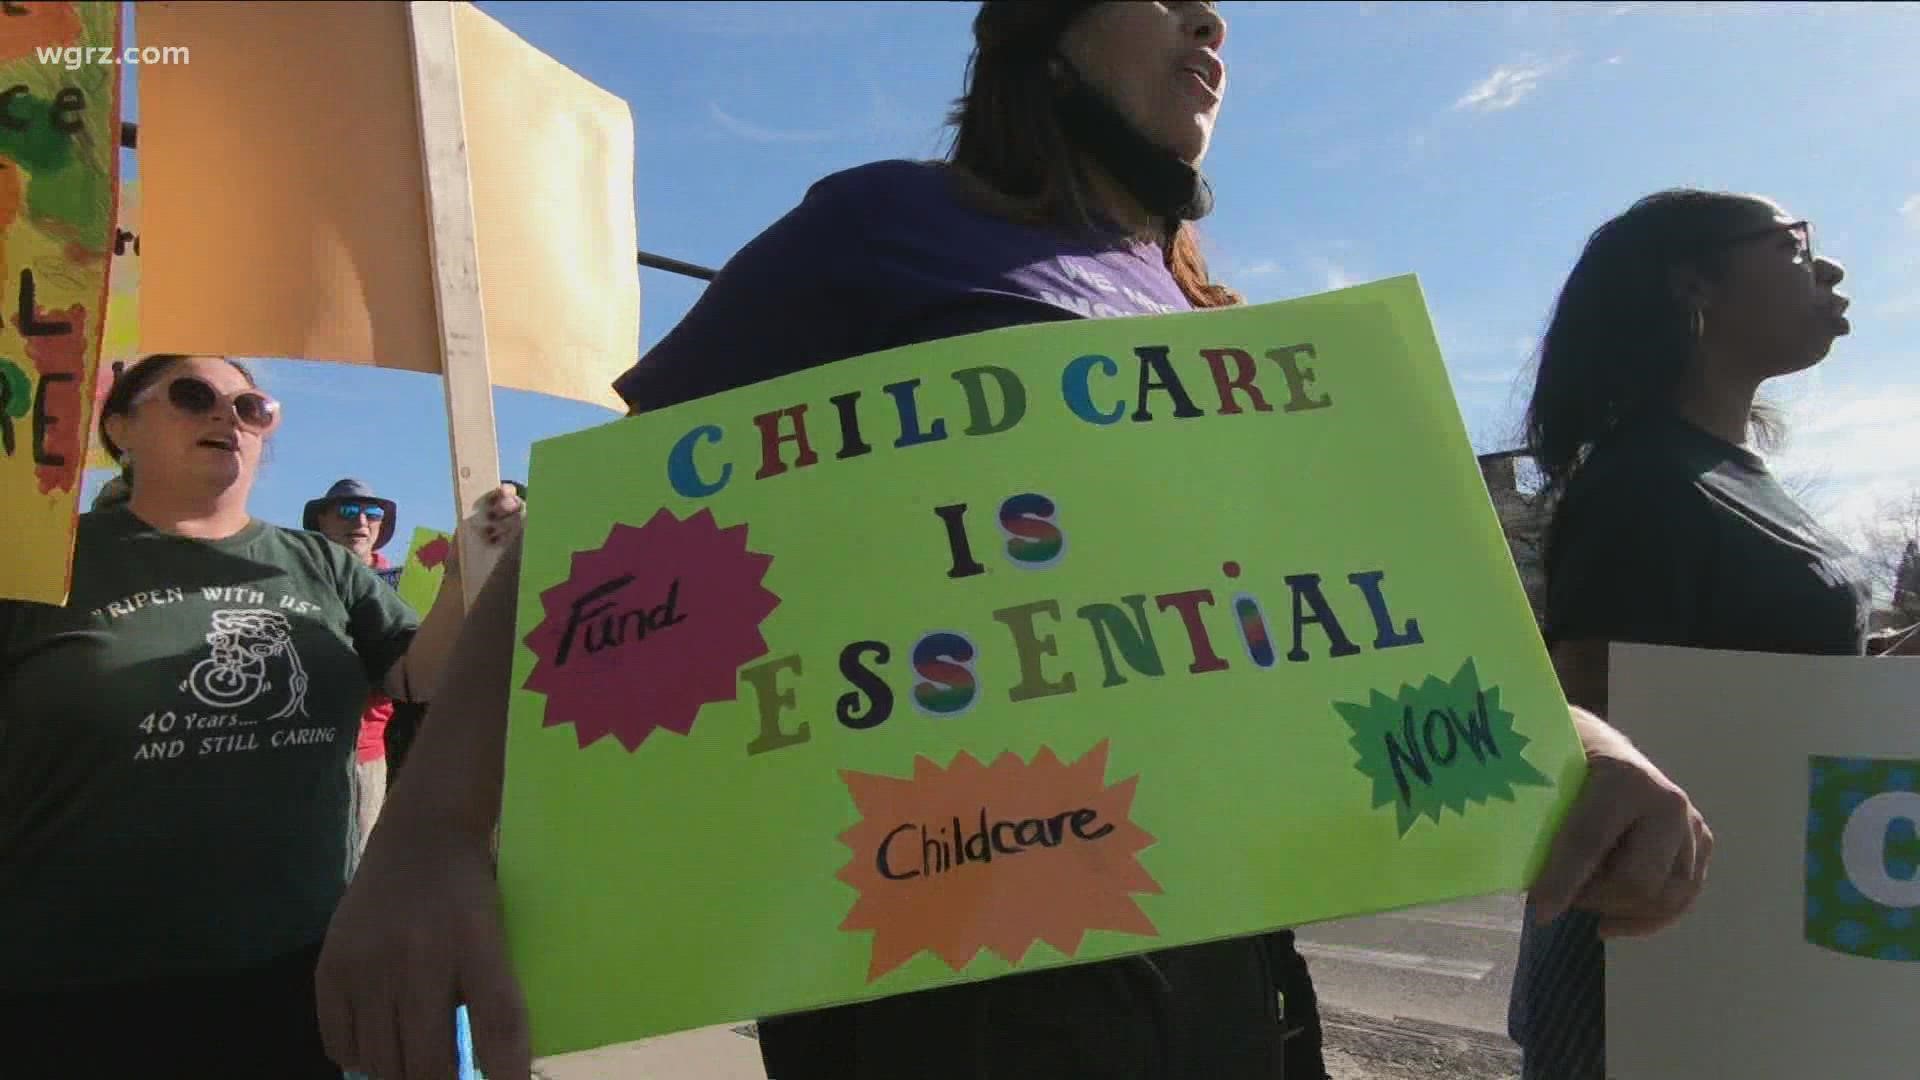 Child care providers are calling for better wages and equity. They are also demanding affordable care for all families.